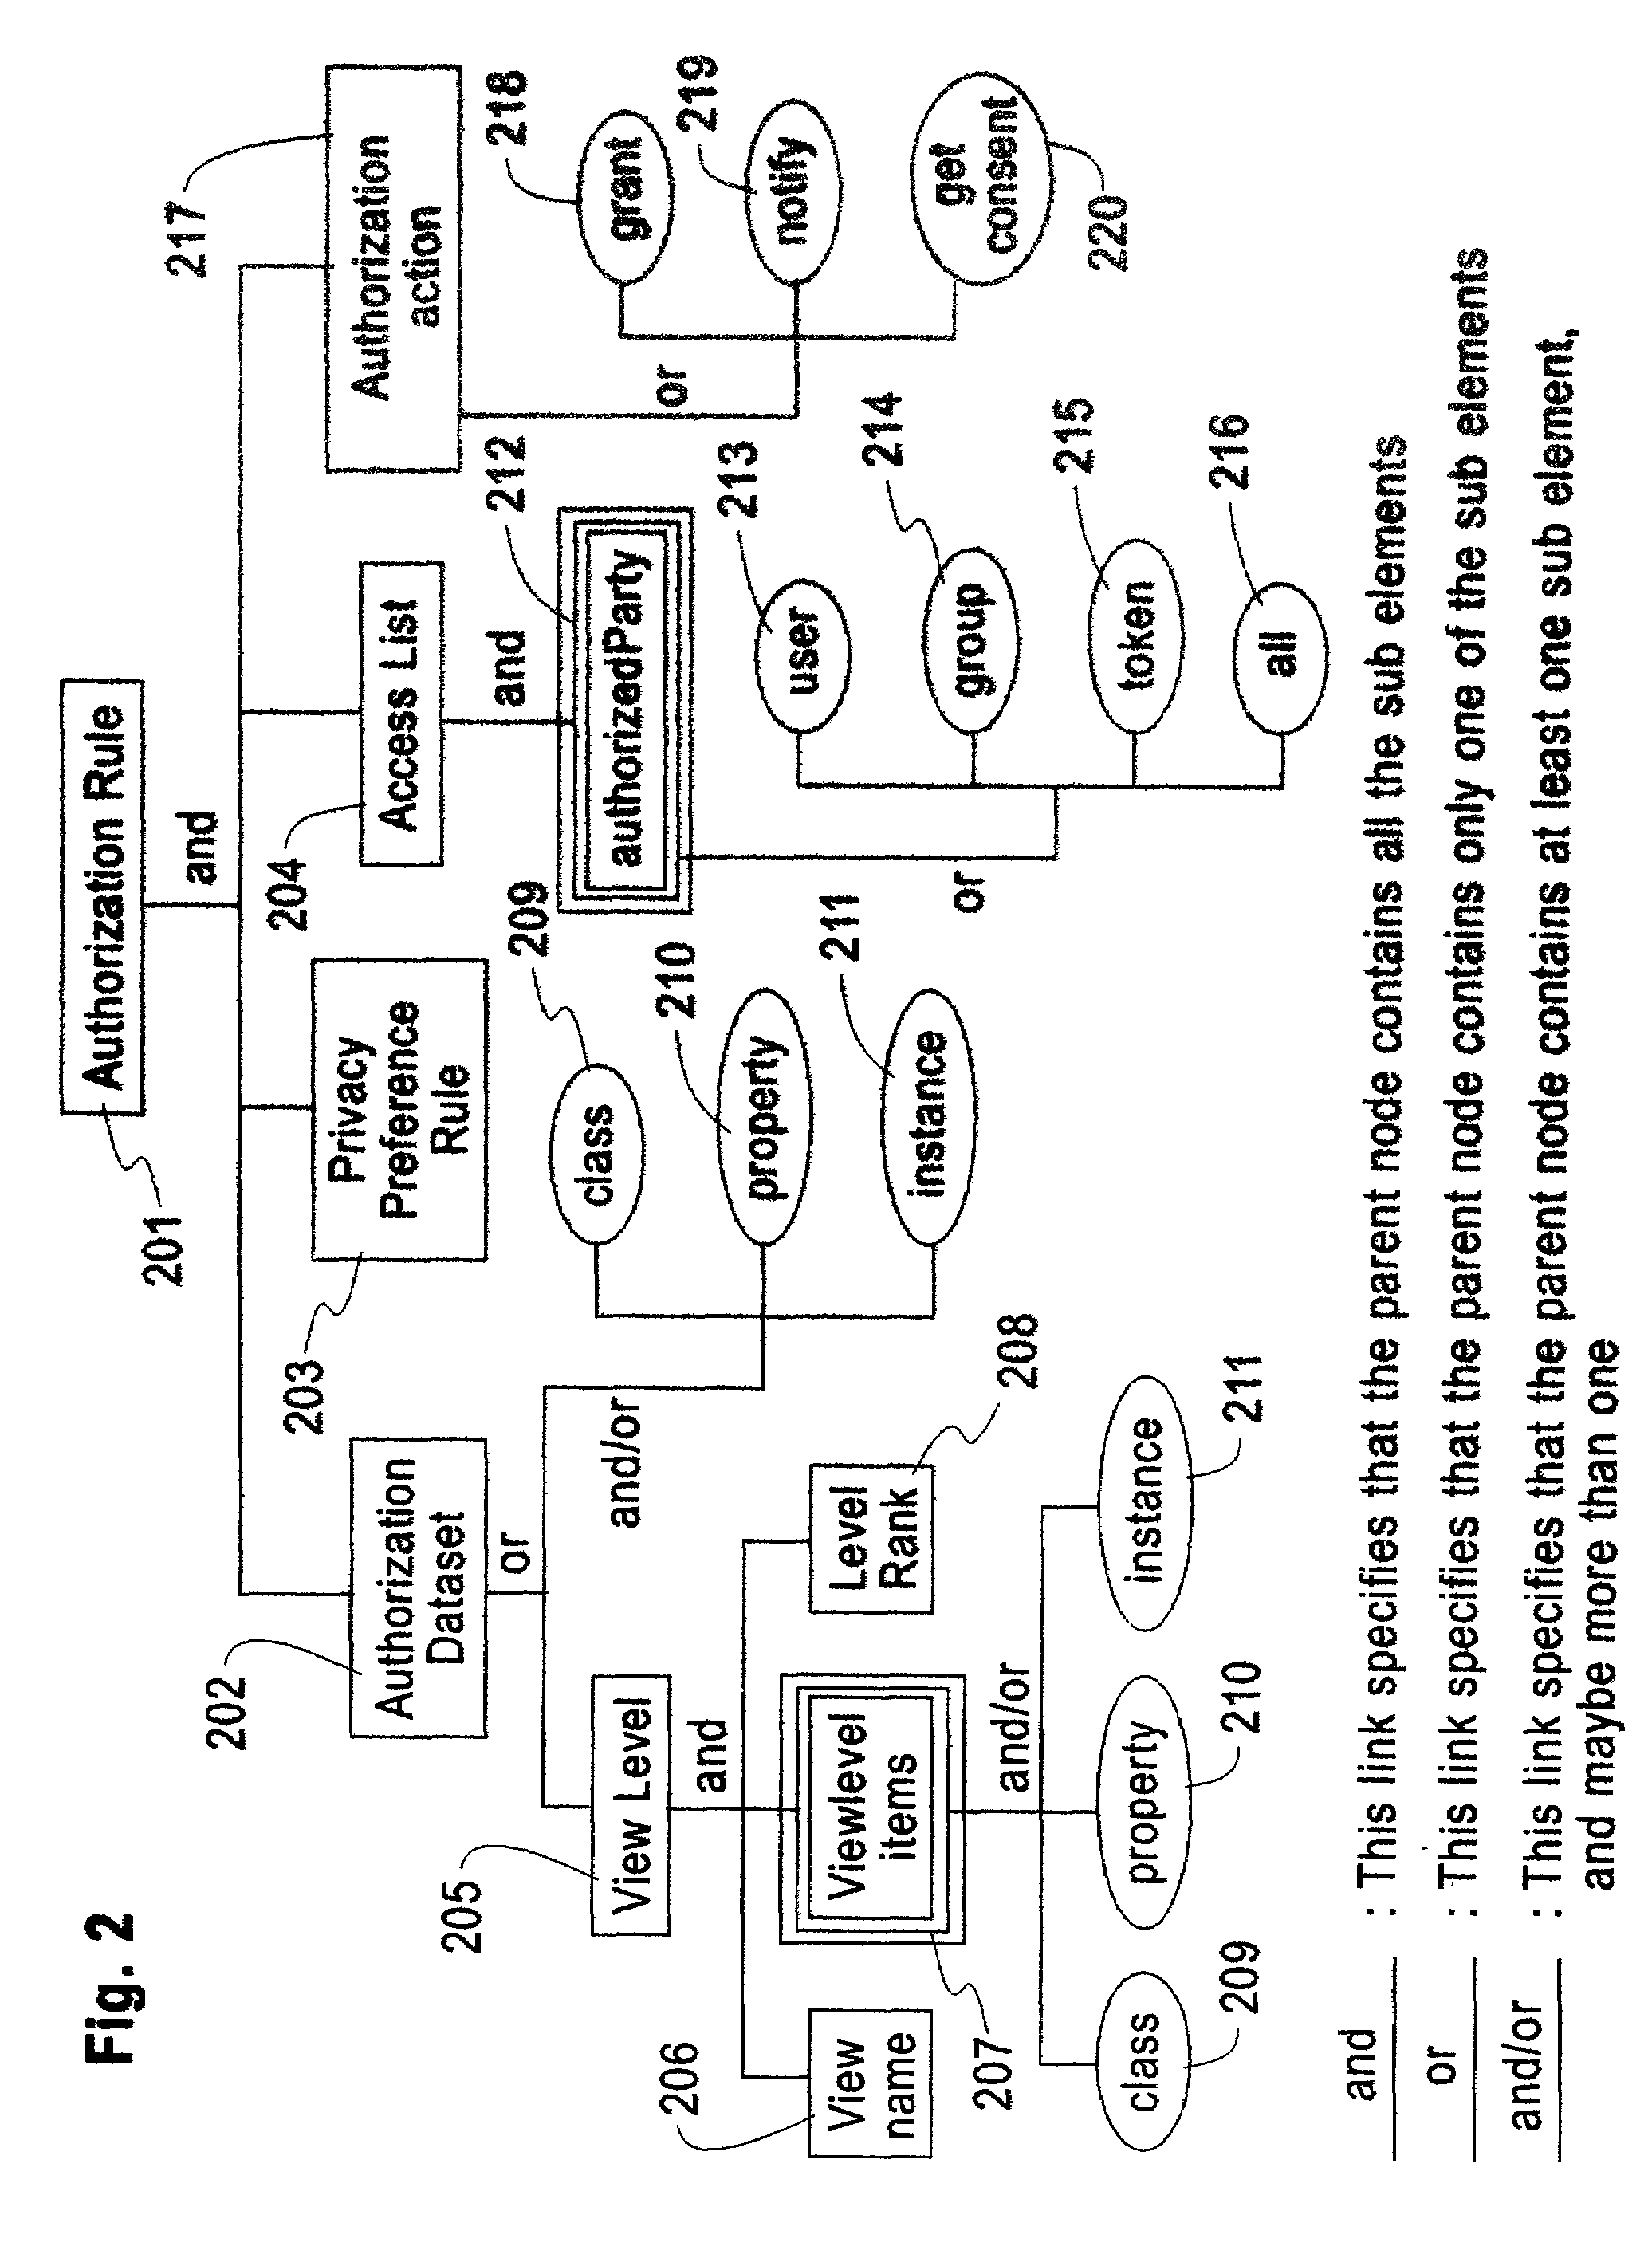 System, method, and business methods for enforcing privacy preferences on personal-data exchanges across a network